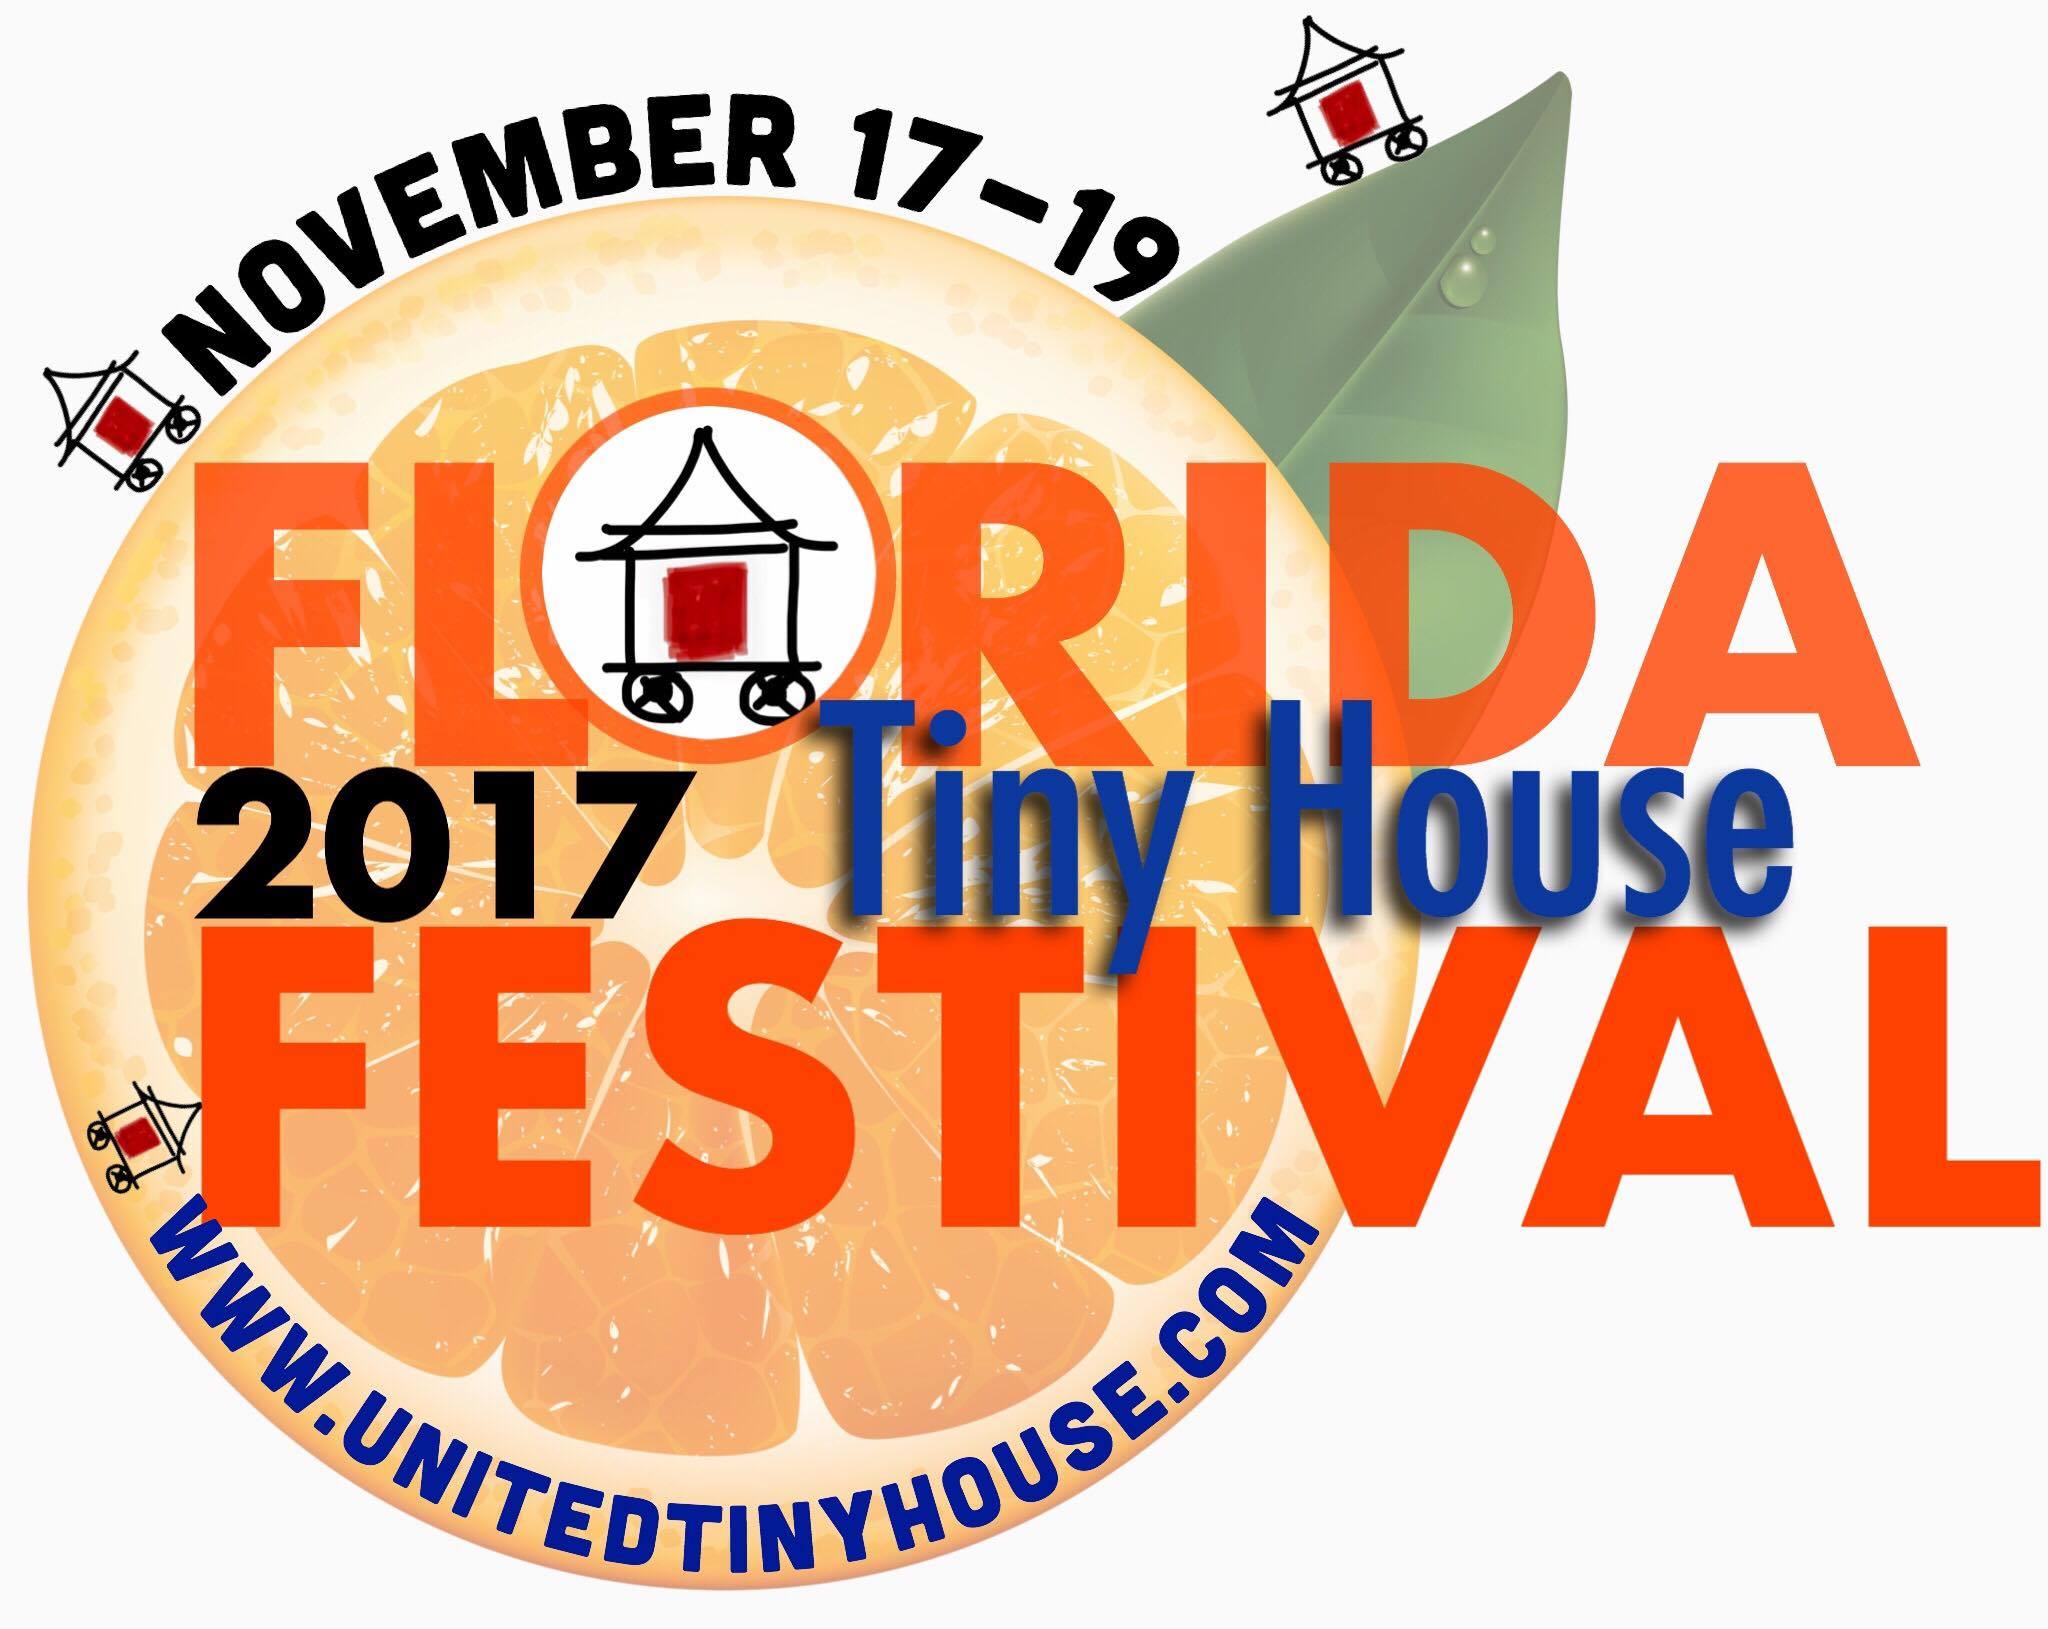 Second annual Florida Tiny House Festival will be anything but tiny